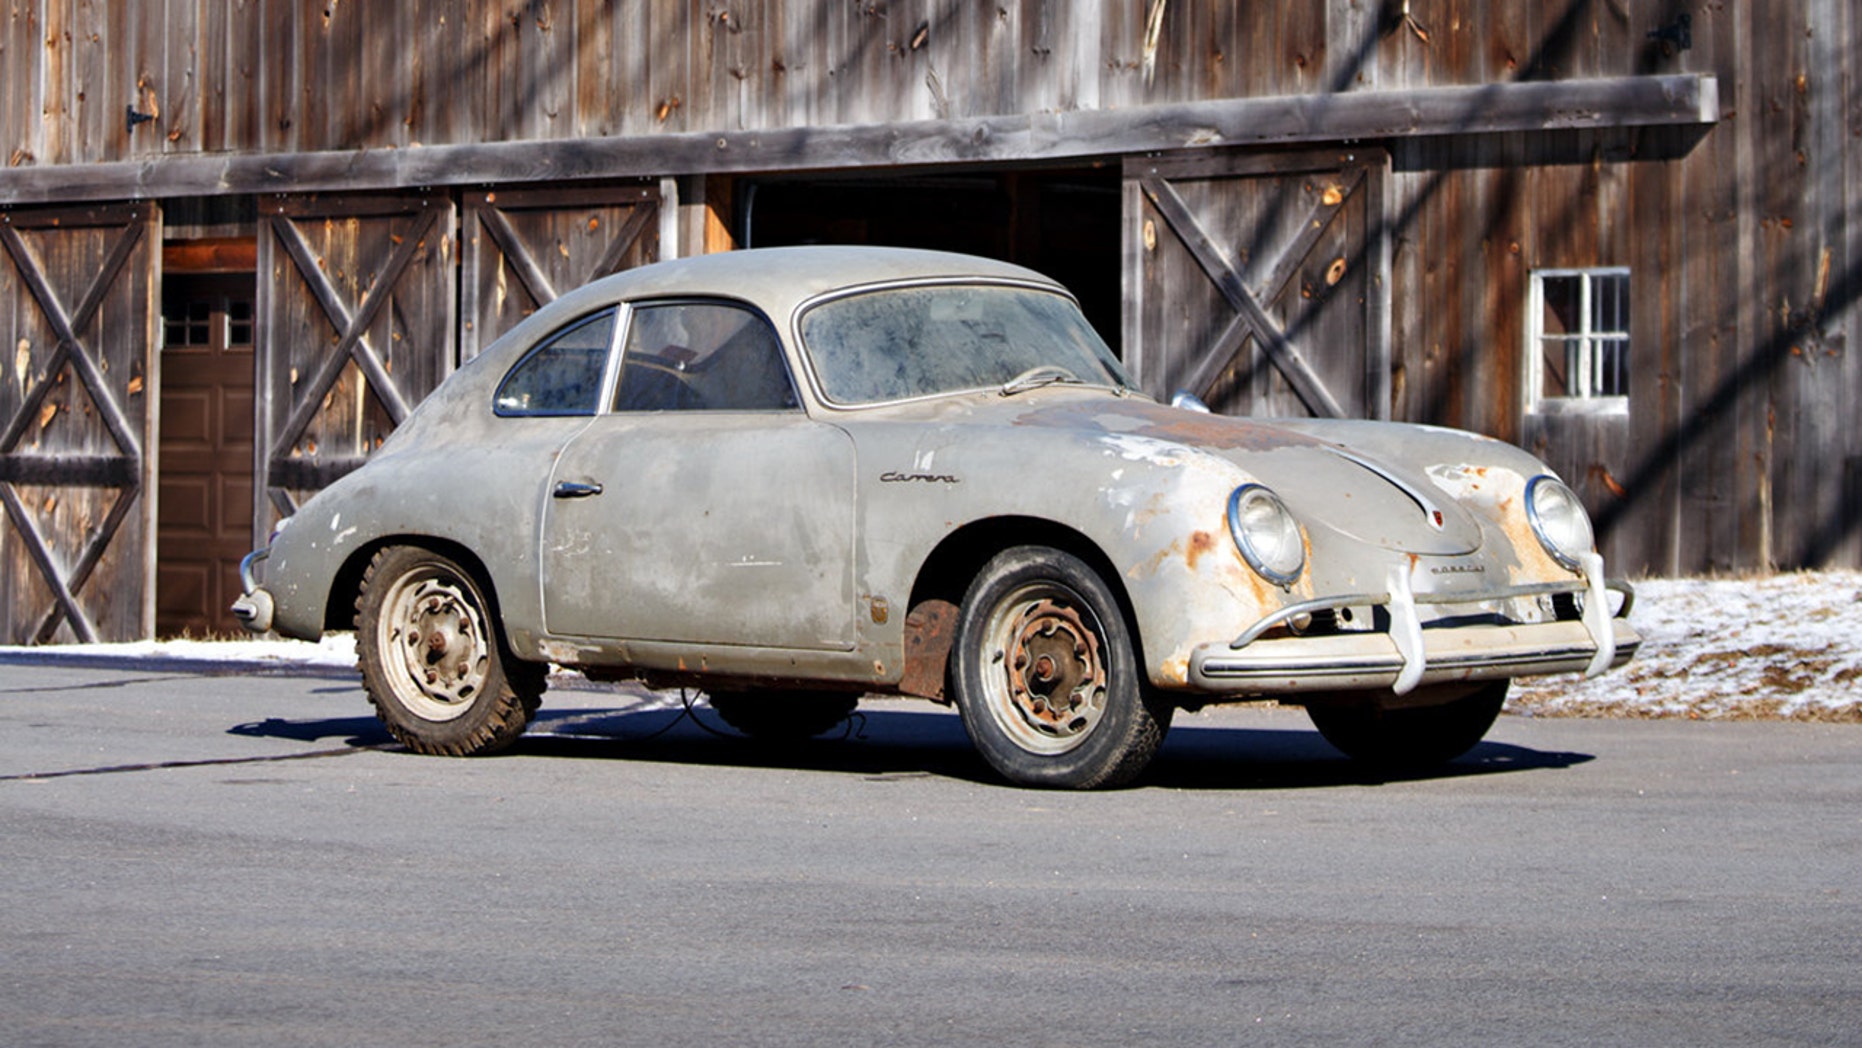 Rusty Porsche Barn Find Expected To Sell For 700000 Or More Fox News 